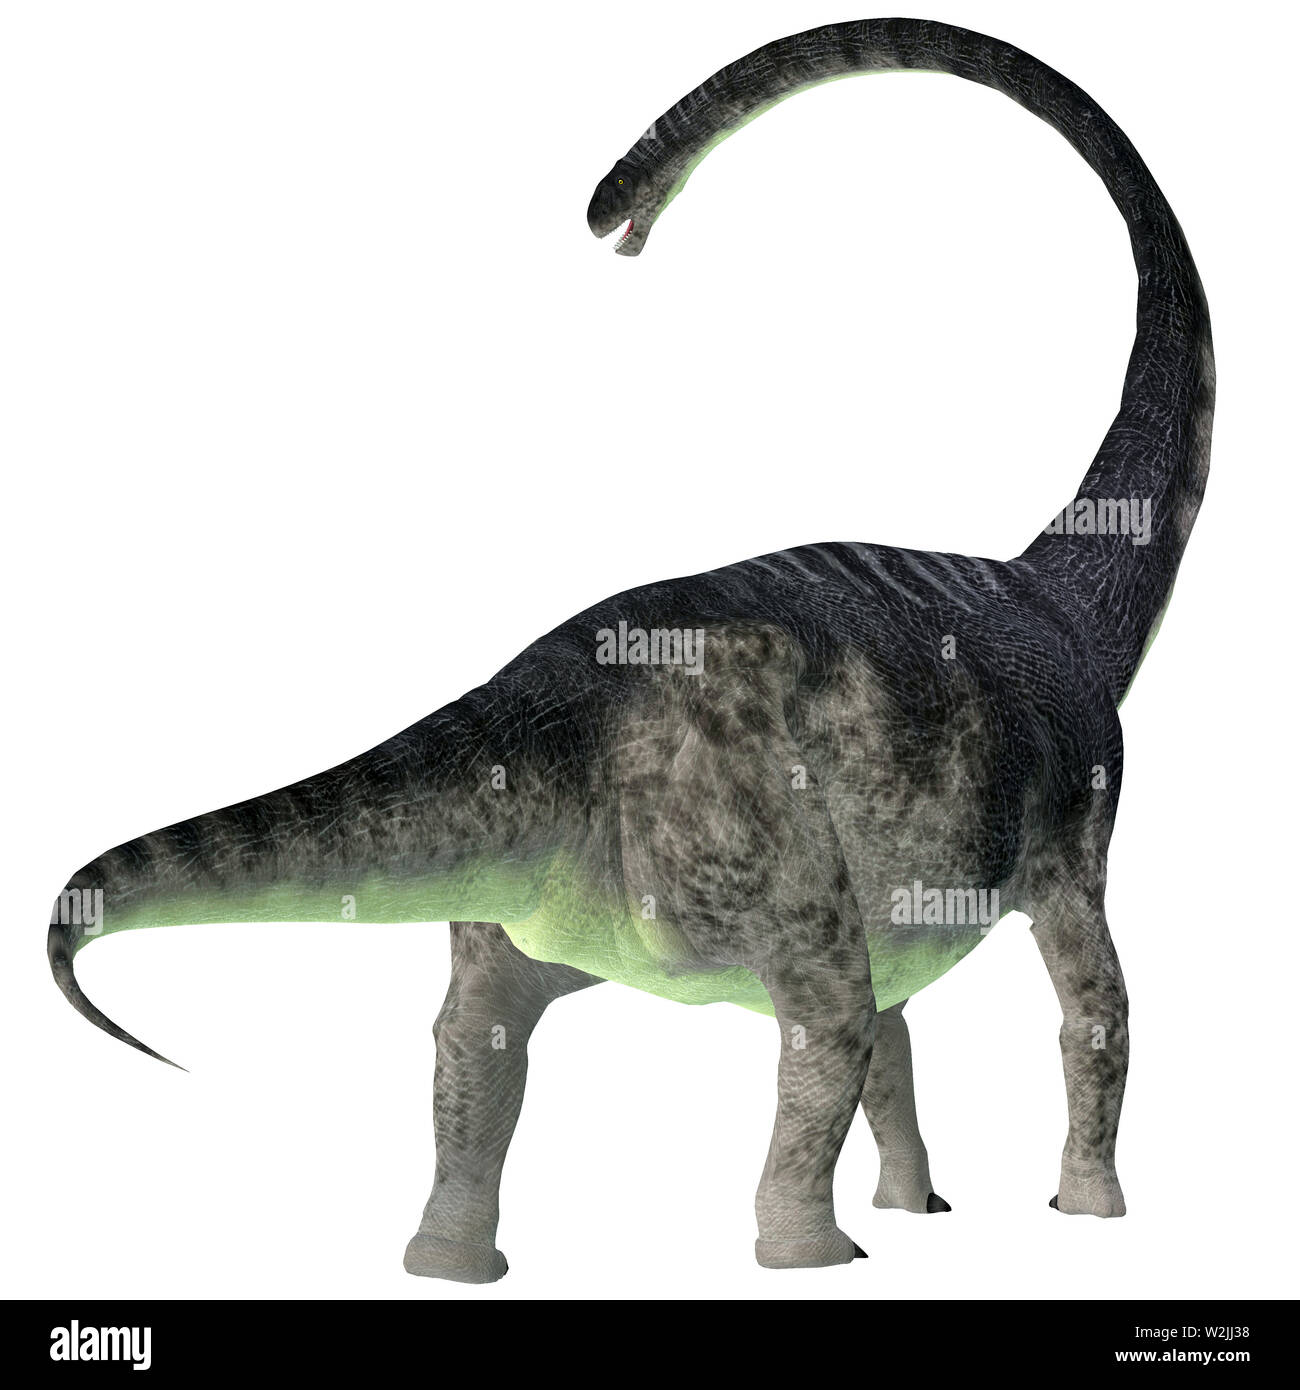 Omeisaurus was a herbivorous sauropod dinosaur that lived in China during the Jurassic Period. Stock Photo